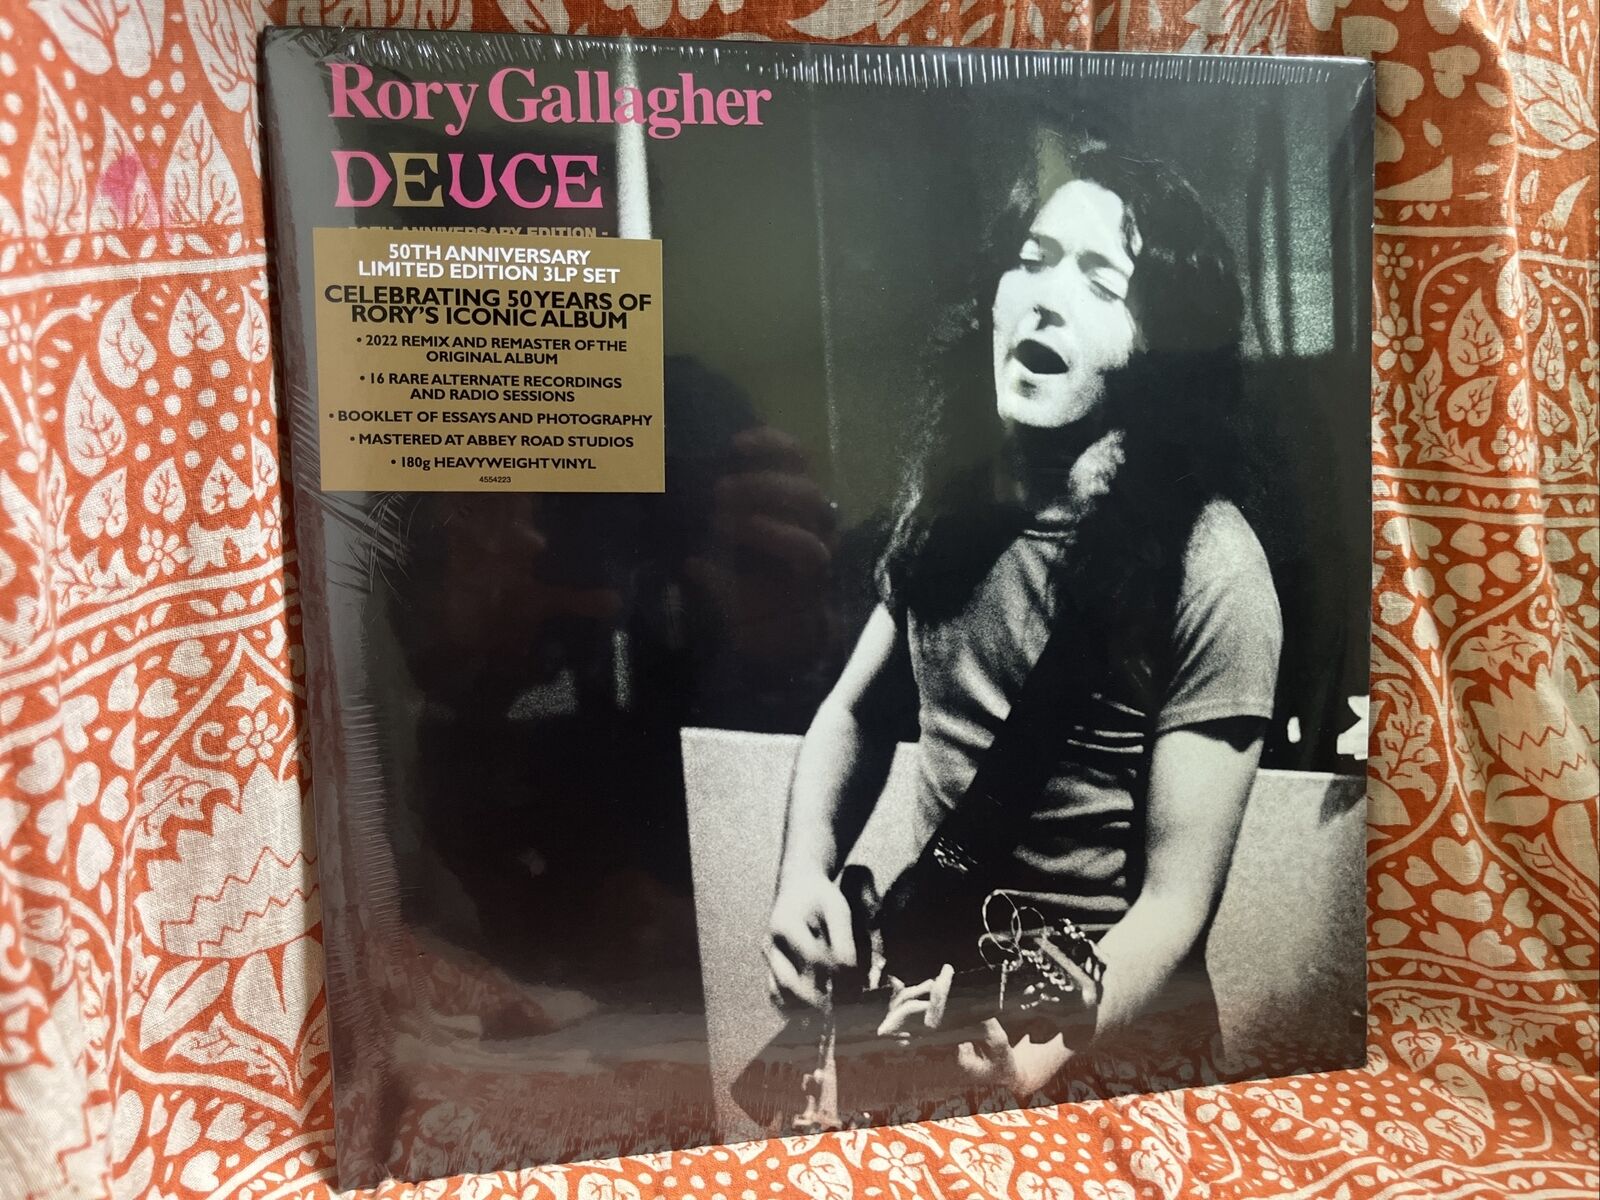 SEALED Deuce (50th Anniversary) by Rory Gallagher (Record, 2022) Vinyl